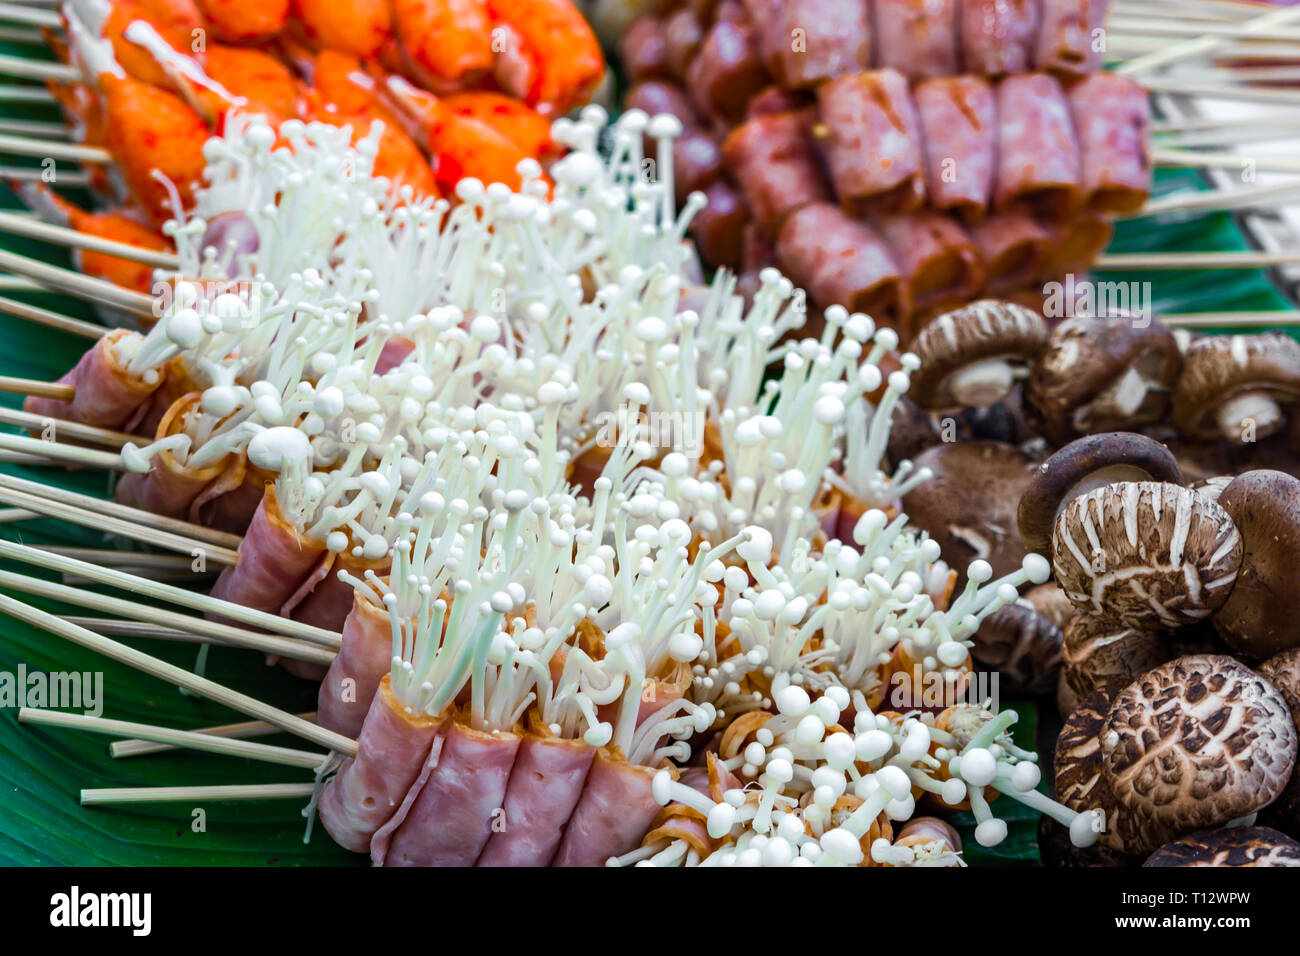 Bacon wrapped mushrooms,a street food in local market in Thailand, Asia - asian food delicious delicasies Stock Photo